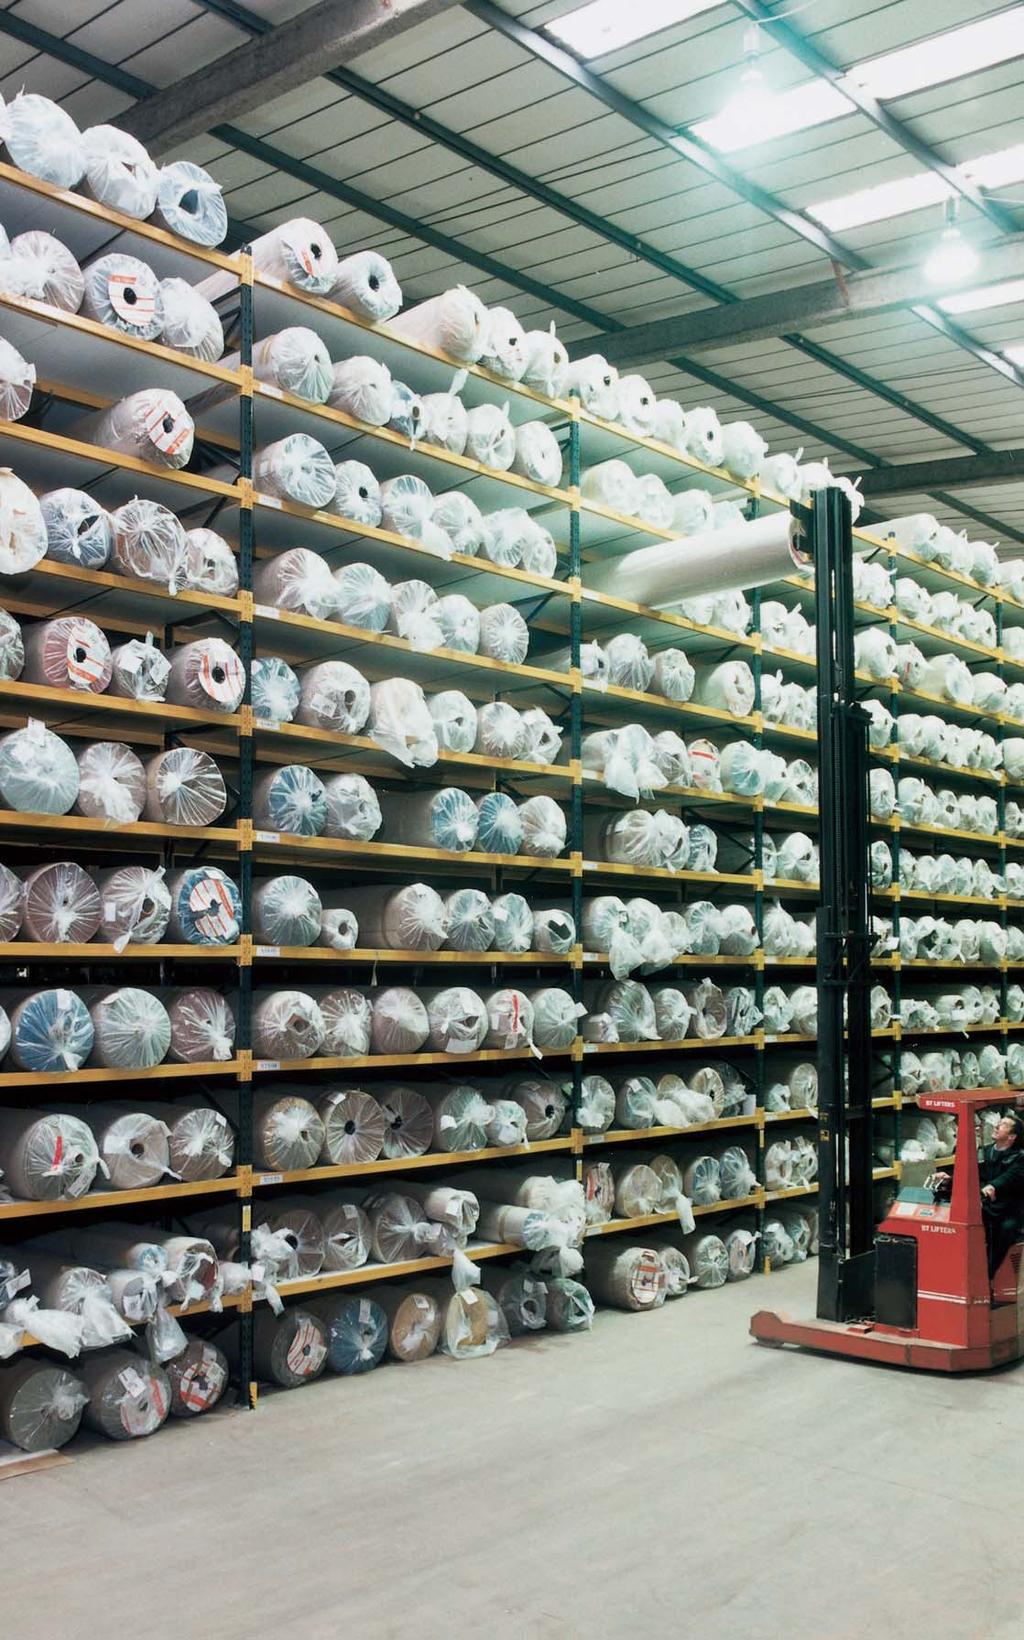 specialised racking & storage equipment Whilst providing the ideal means of storing